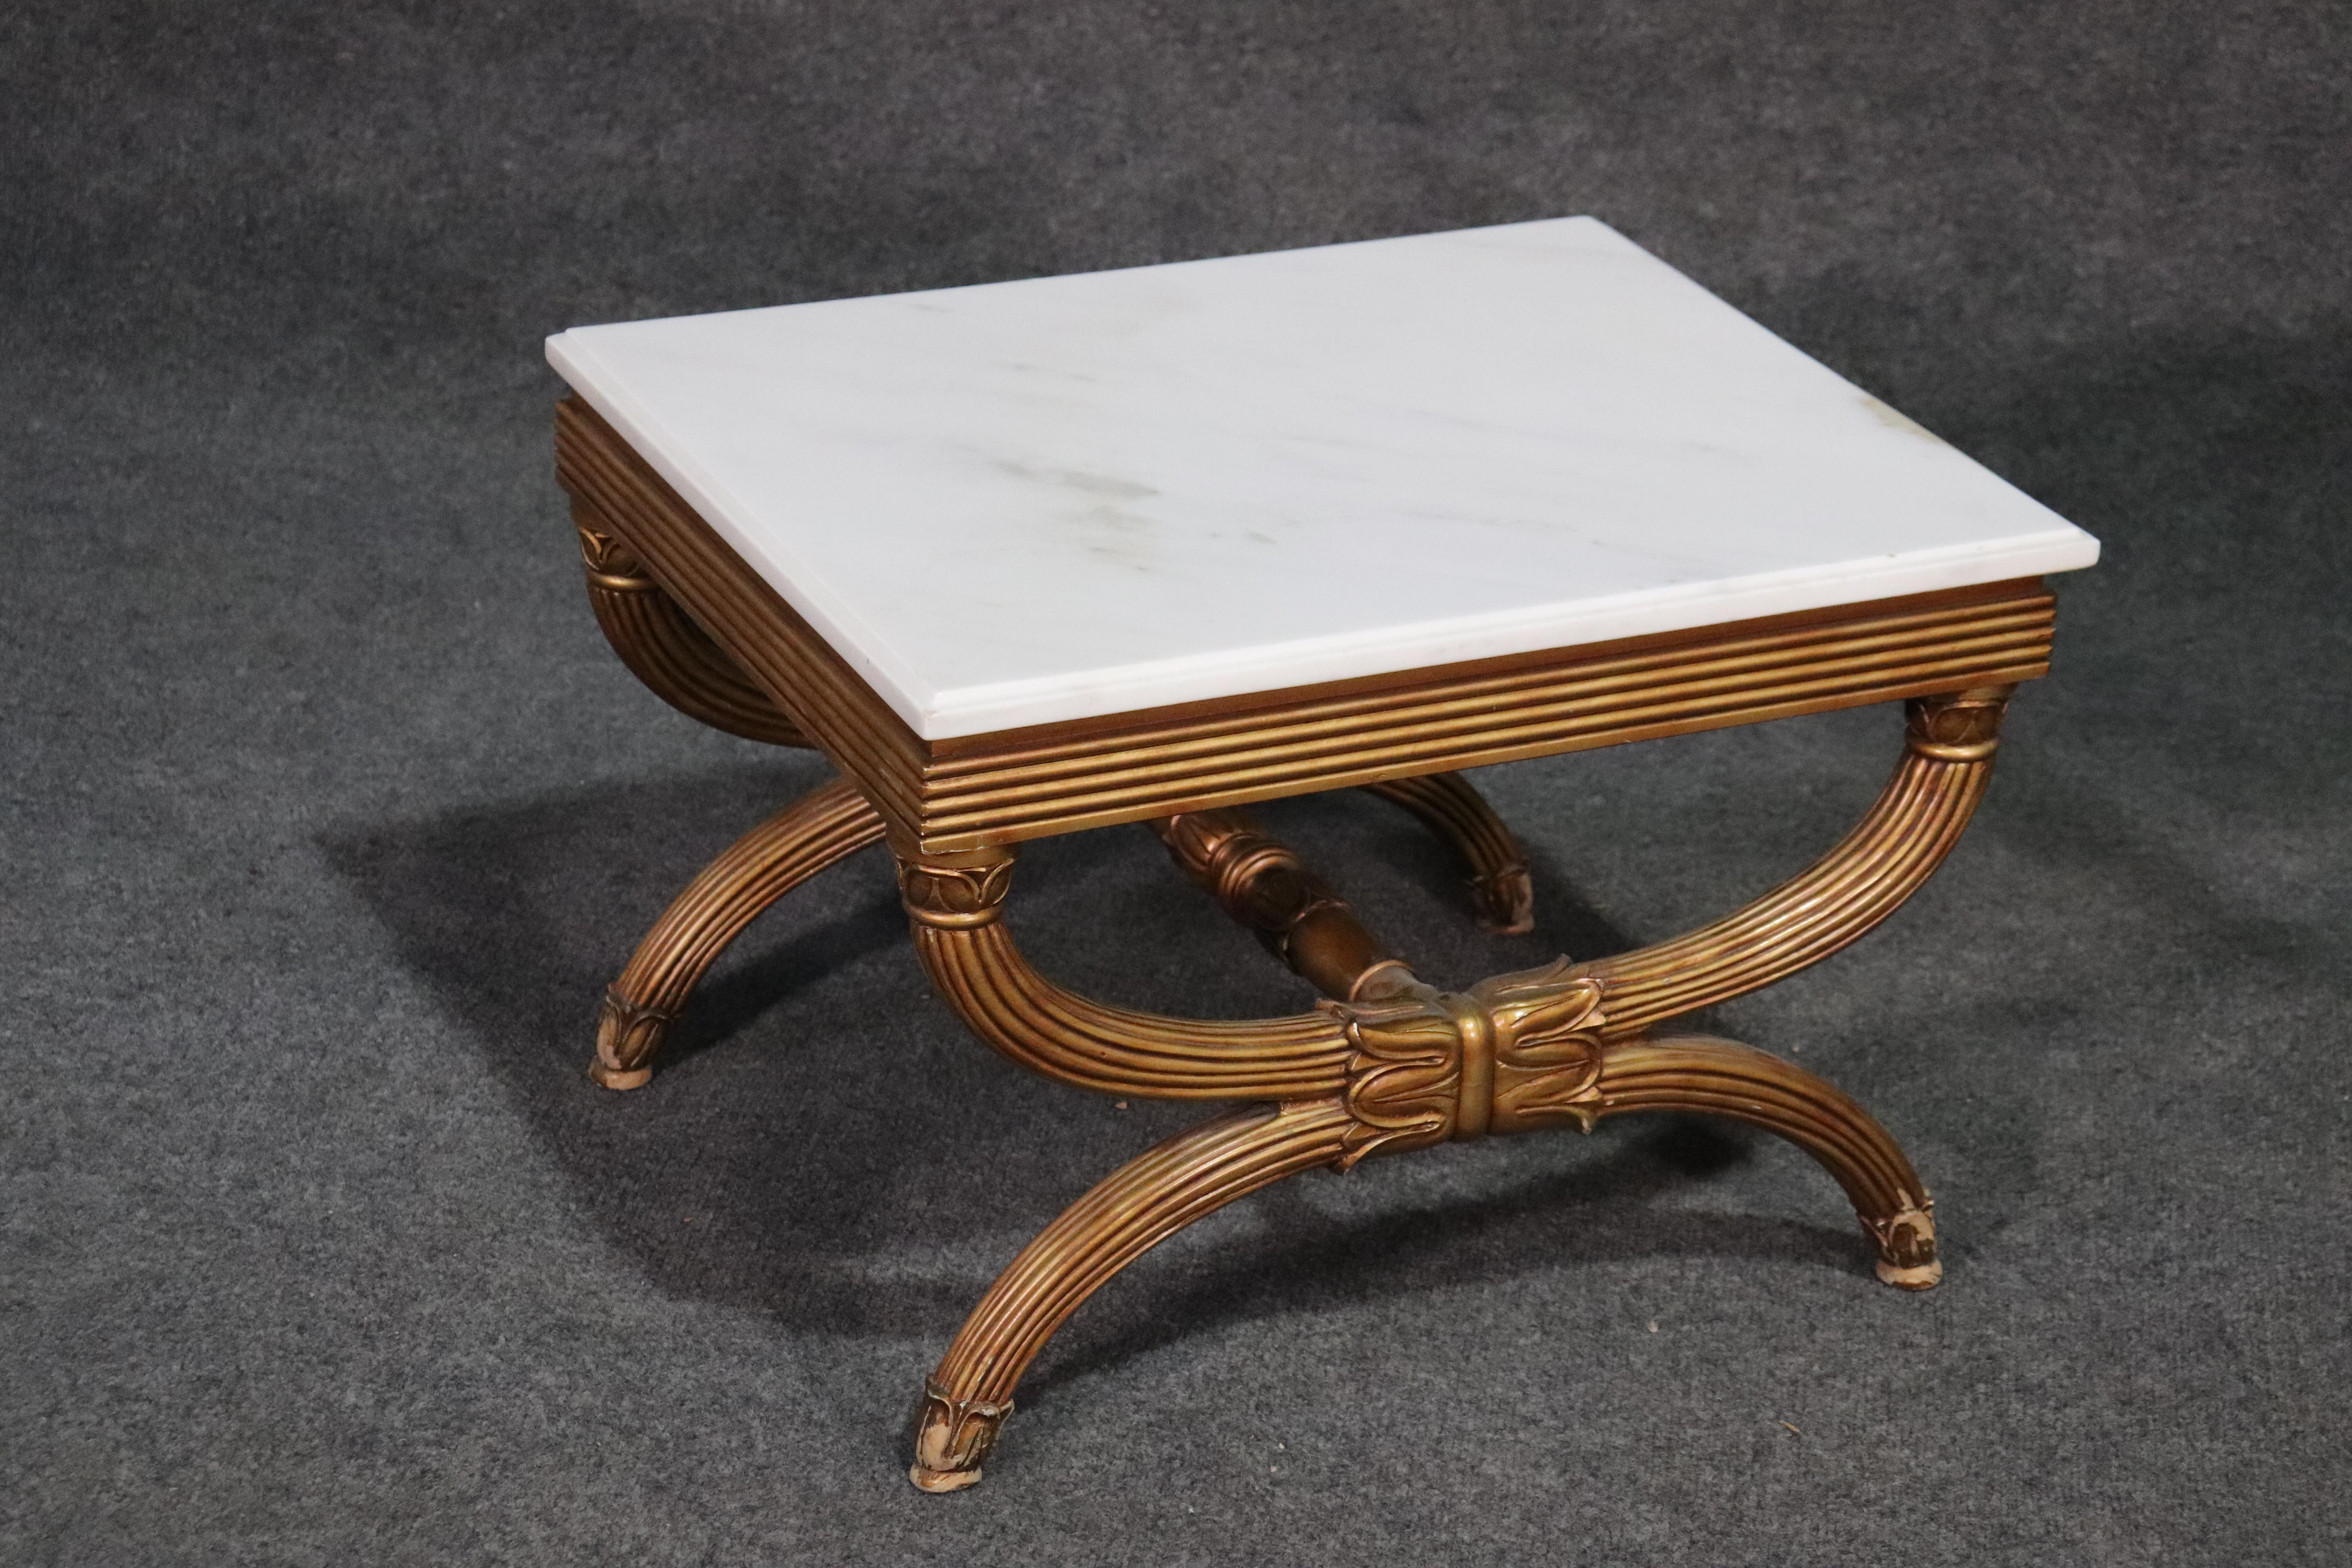 These are beautifully gilded tables with white marble tops. They can be painted in any color or left as they are. They date to the 1950s and are in good condition with minor gold losses around the legs. They each measure 23 wide x 19 deep x 18 tall.